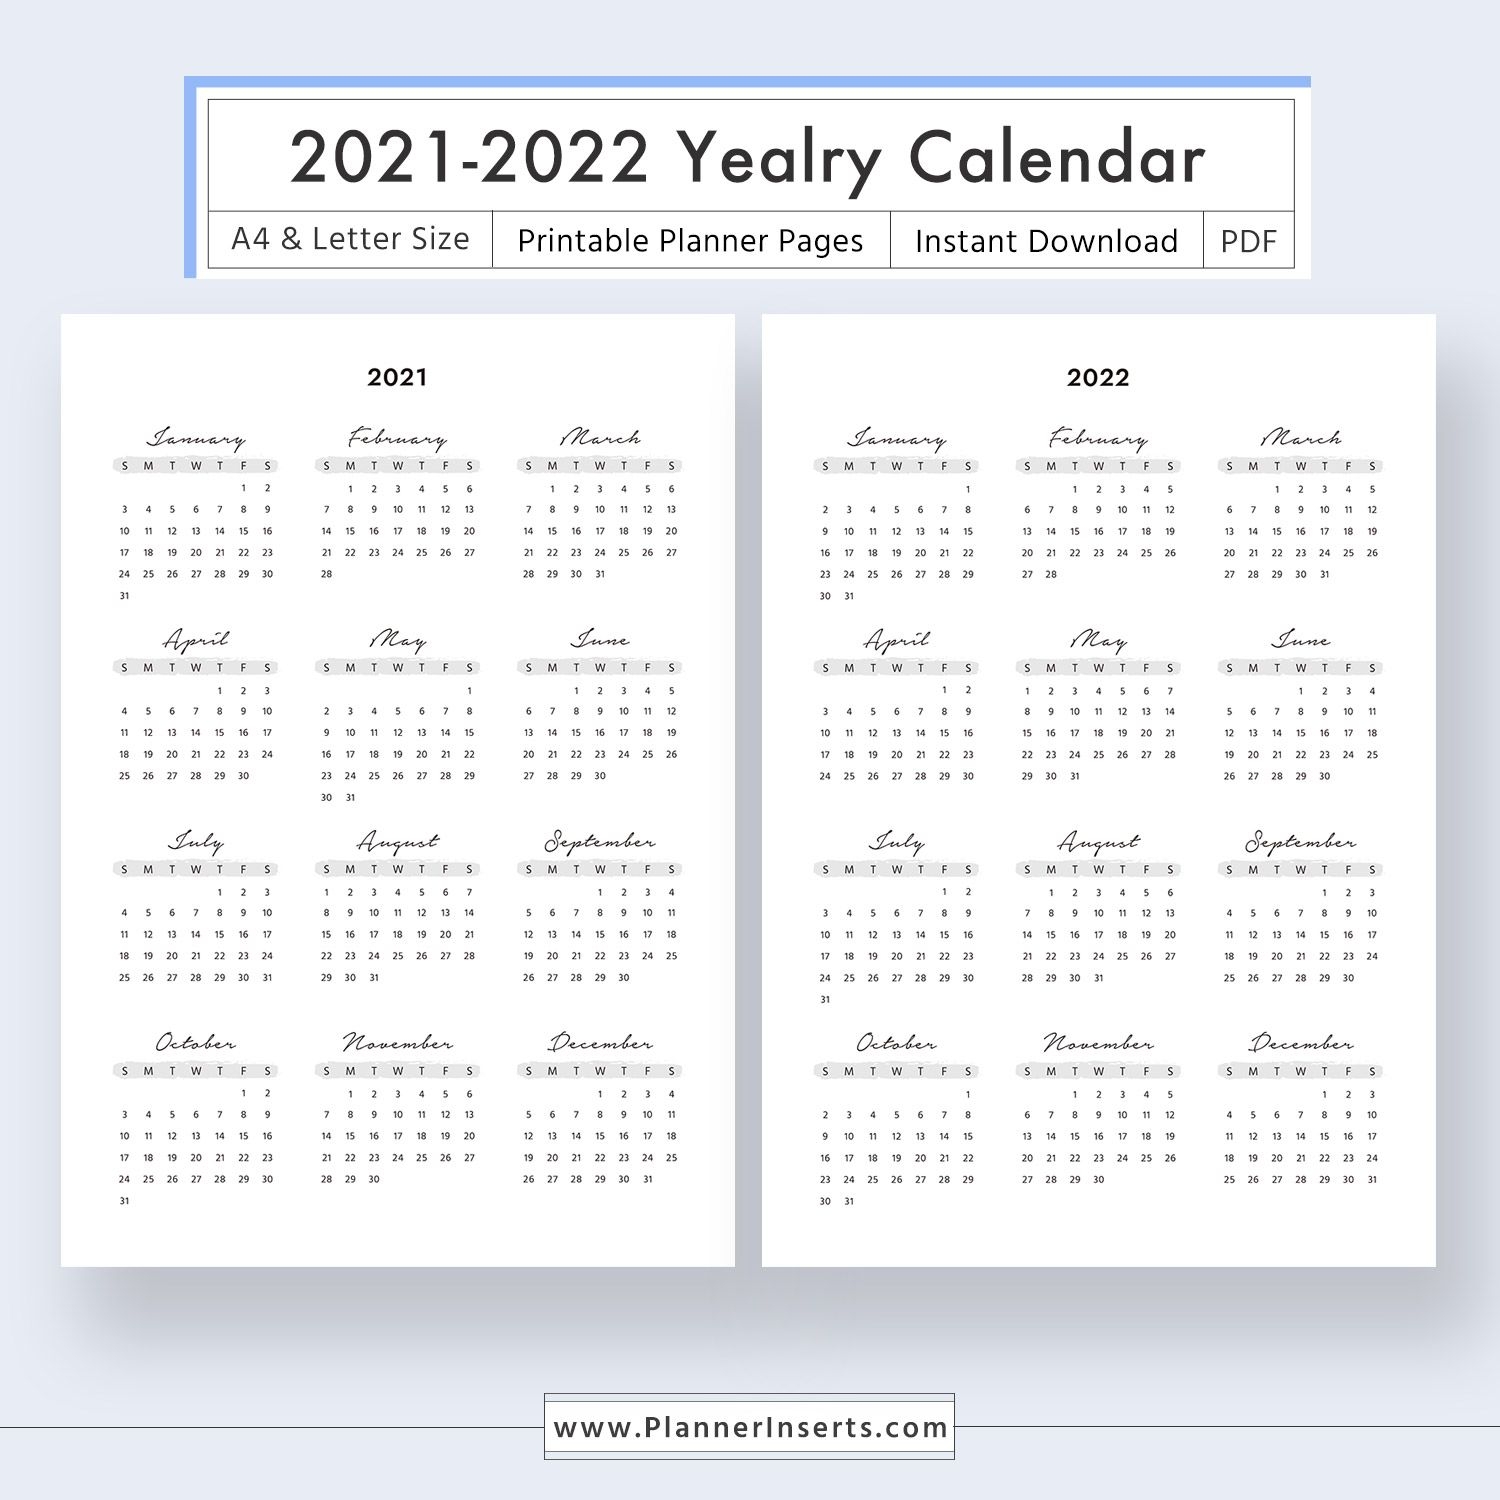 2021 2022 yearly calendar for unlimited instant download